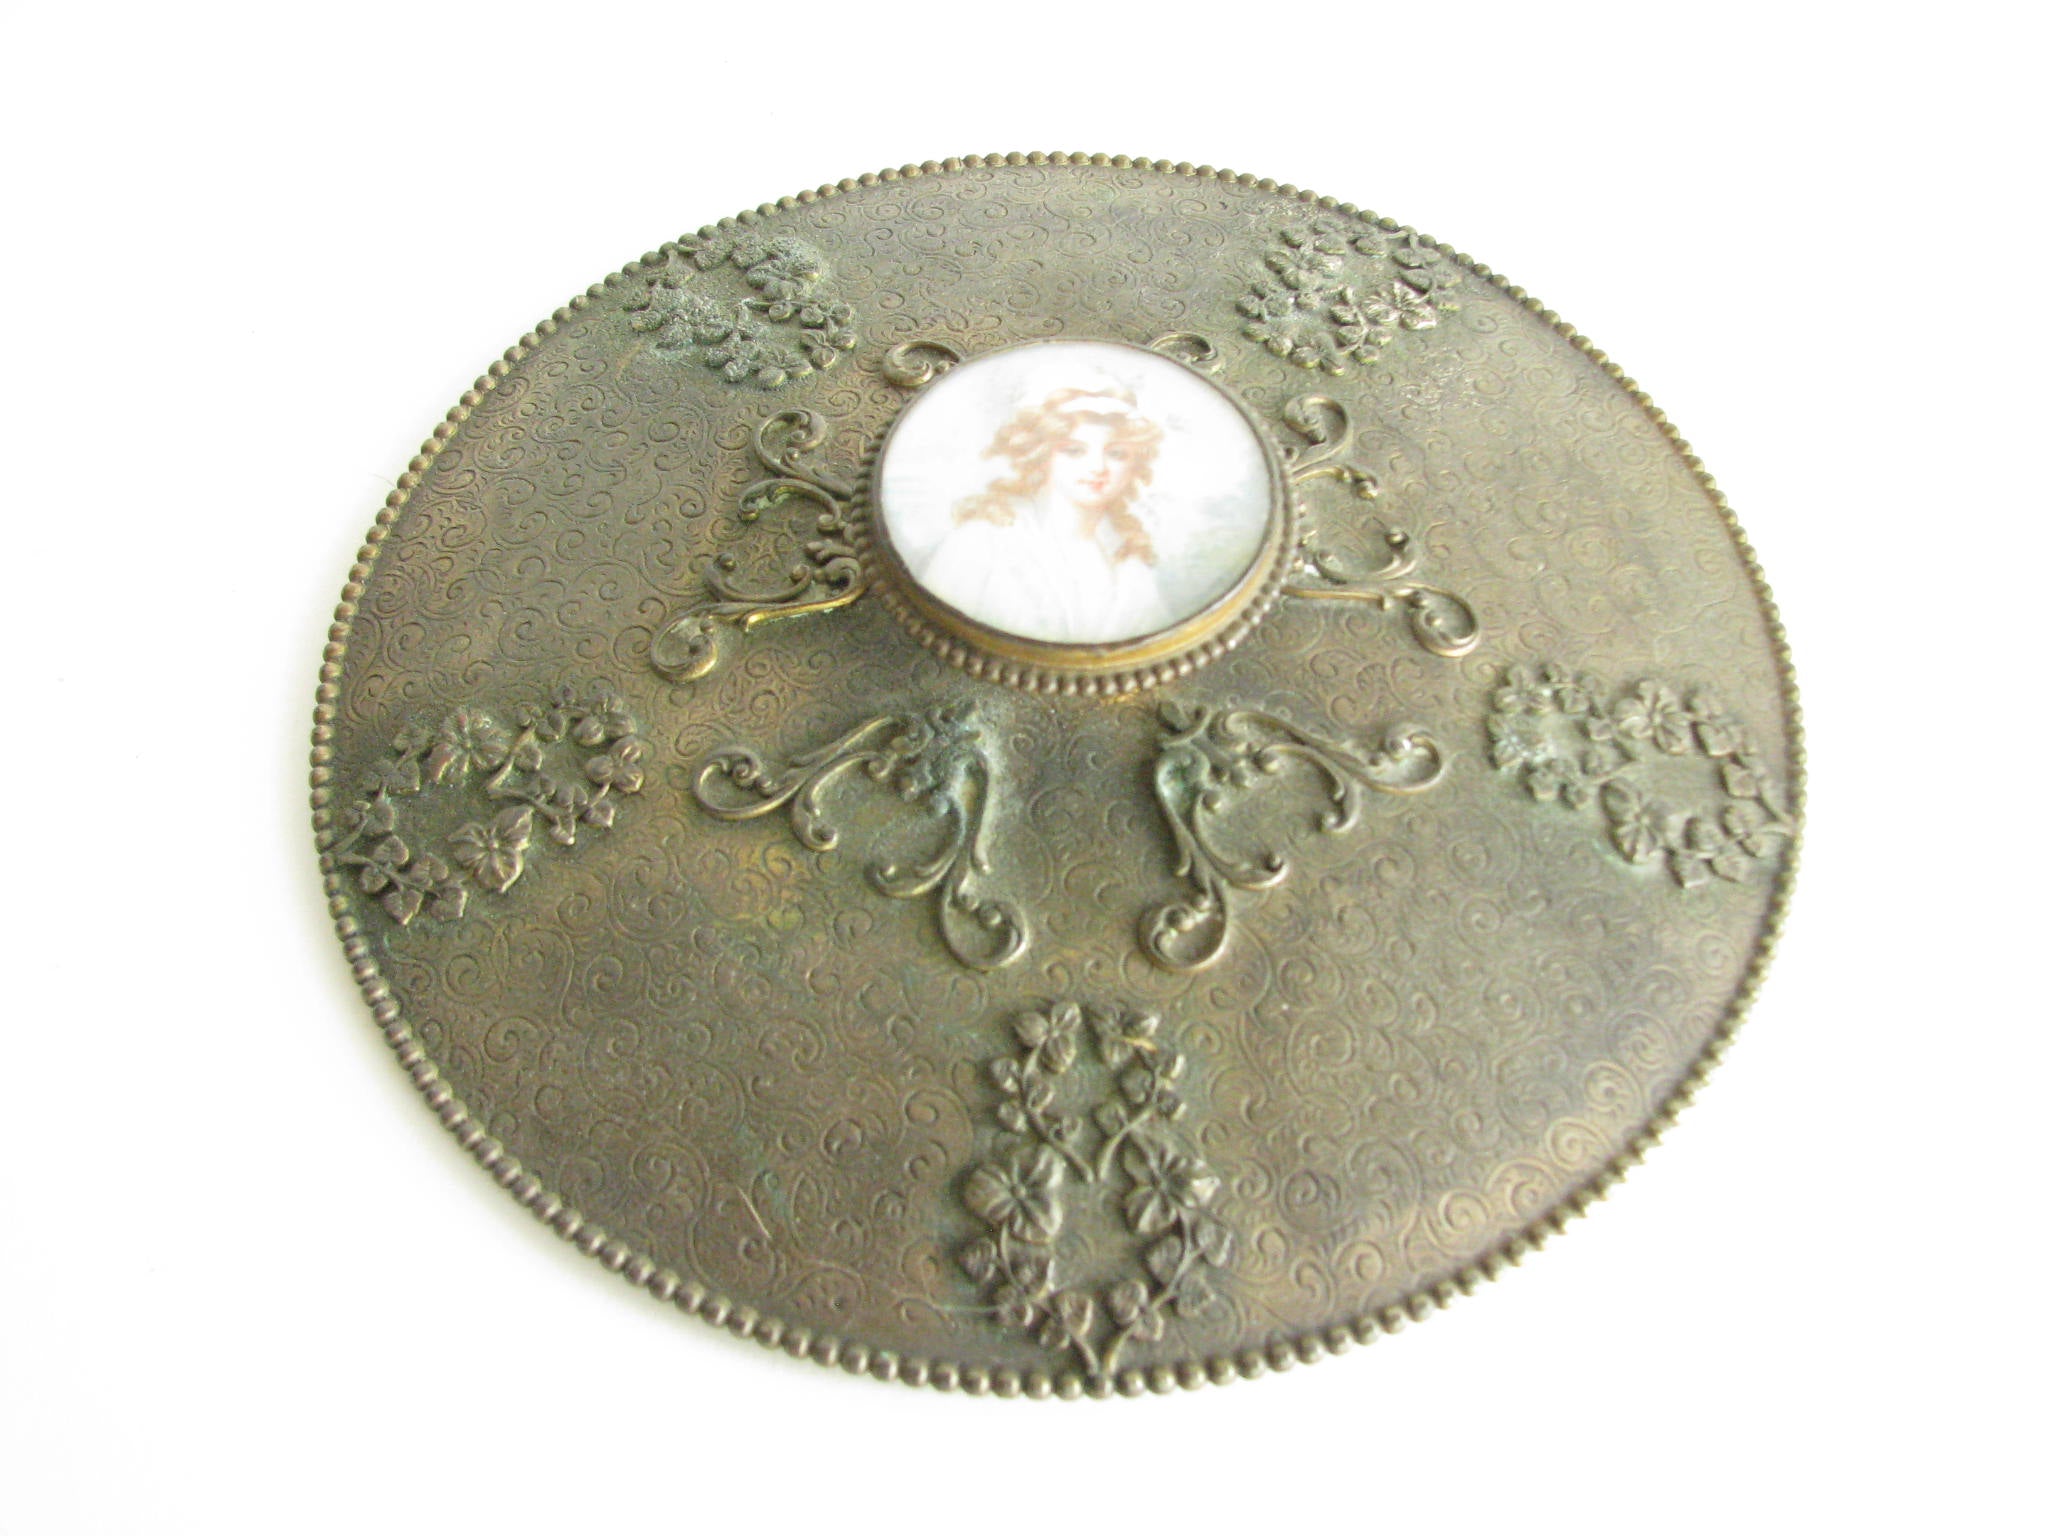 edgebrookhouse - Antique Embossed Gilt Metal Lid with Enamel Painting of Woman